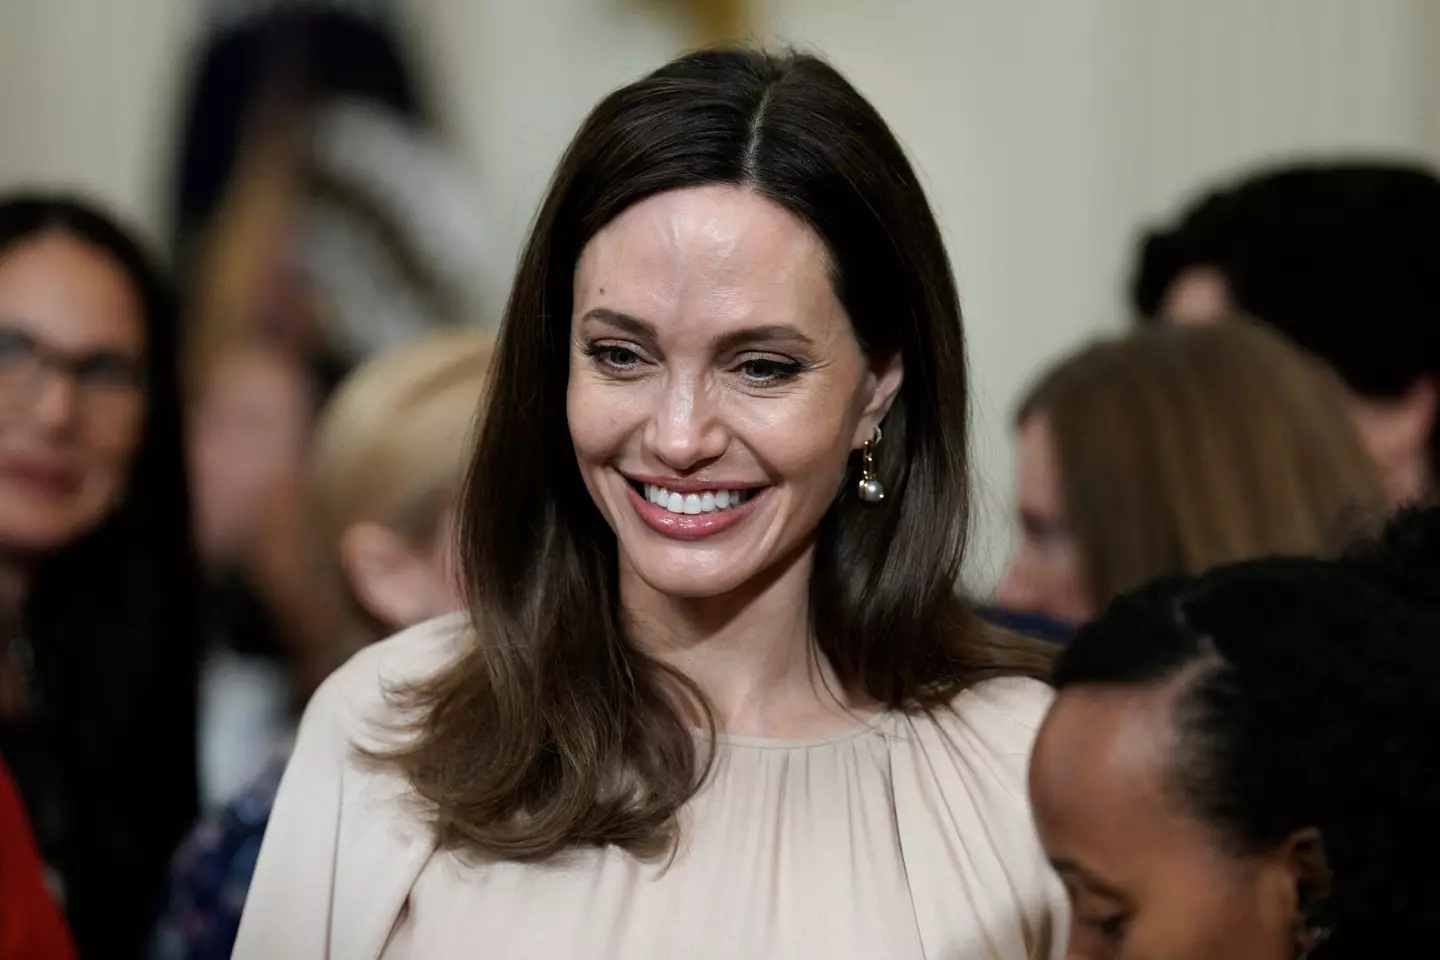 Jolie has a double mastectomy in 2013.